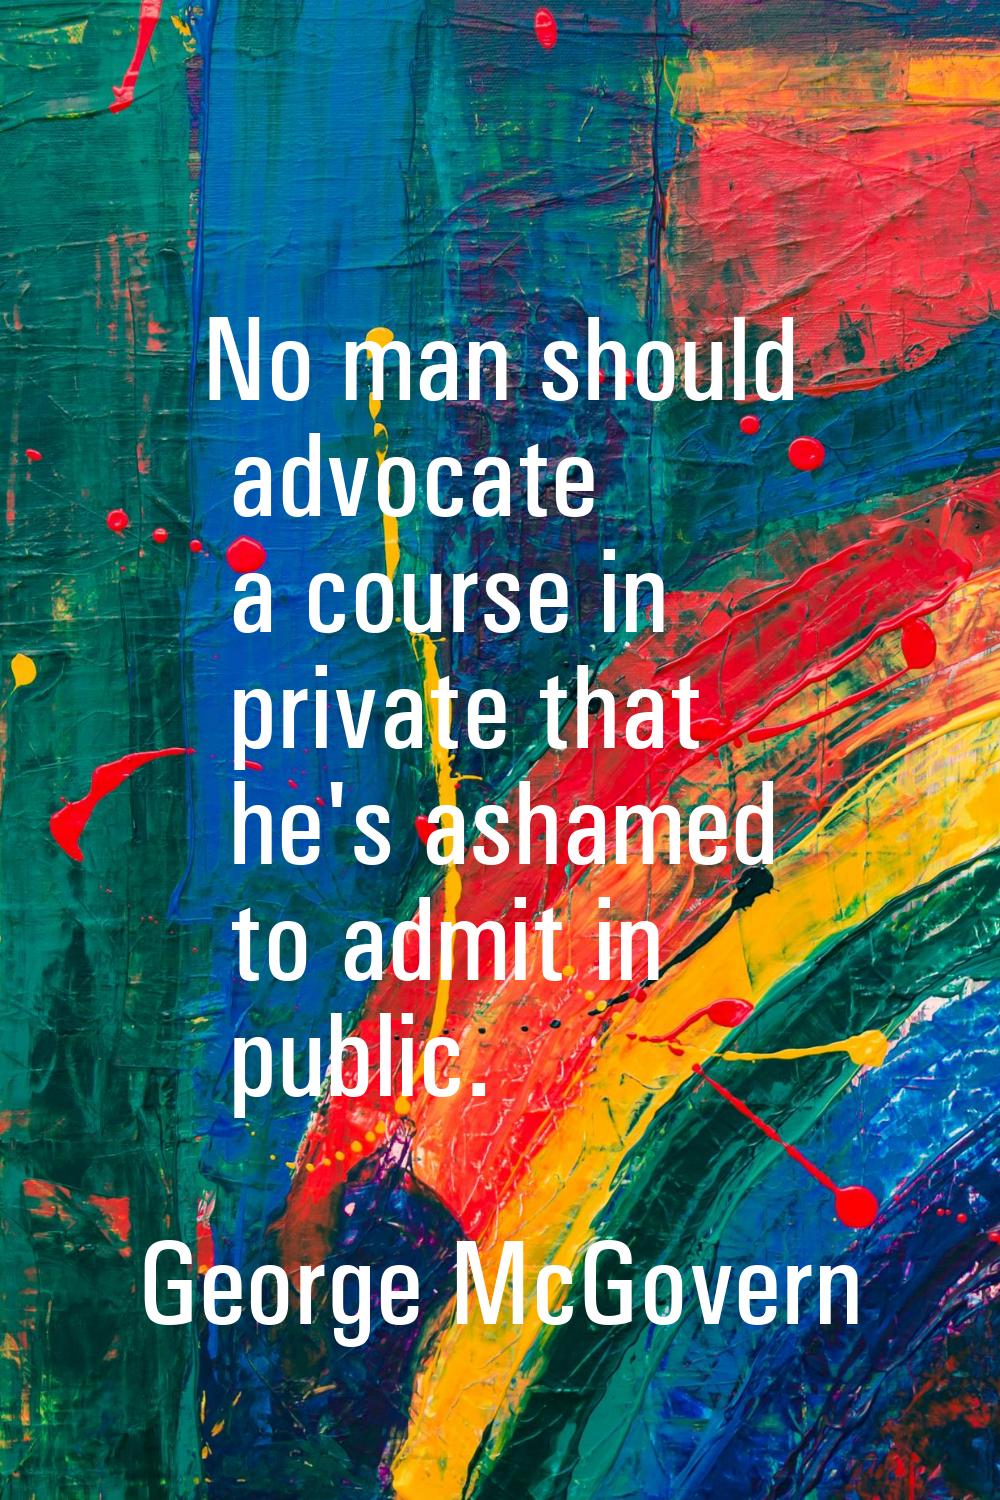 No man should advocate a course in private that he's ashamed to admit in public.